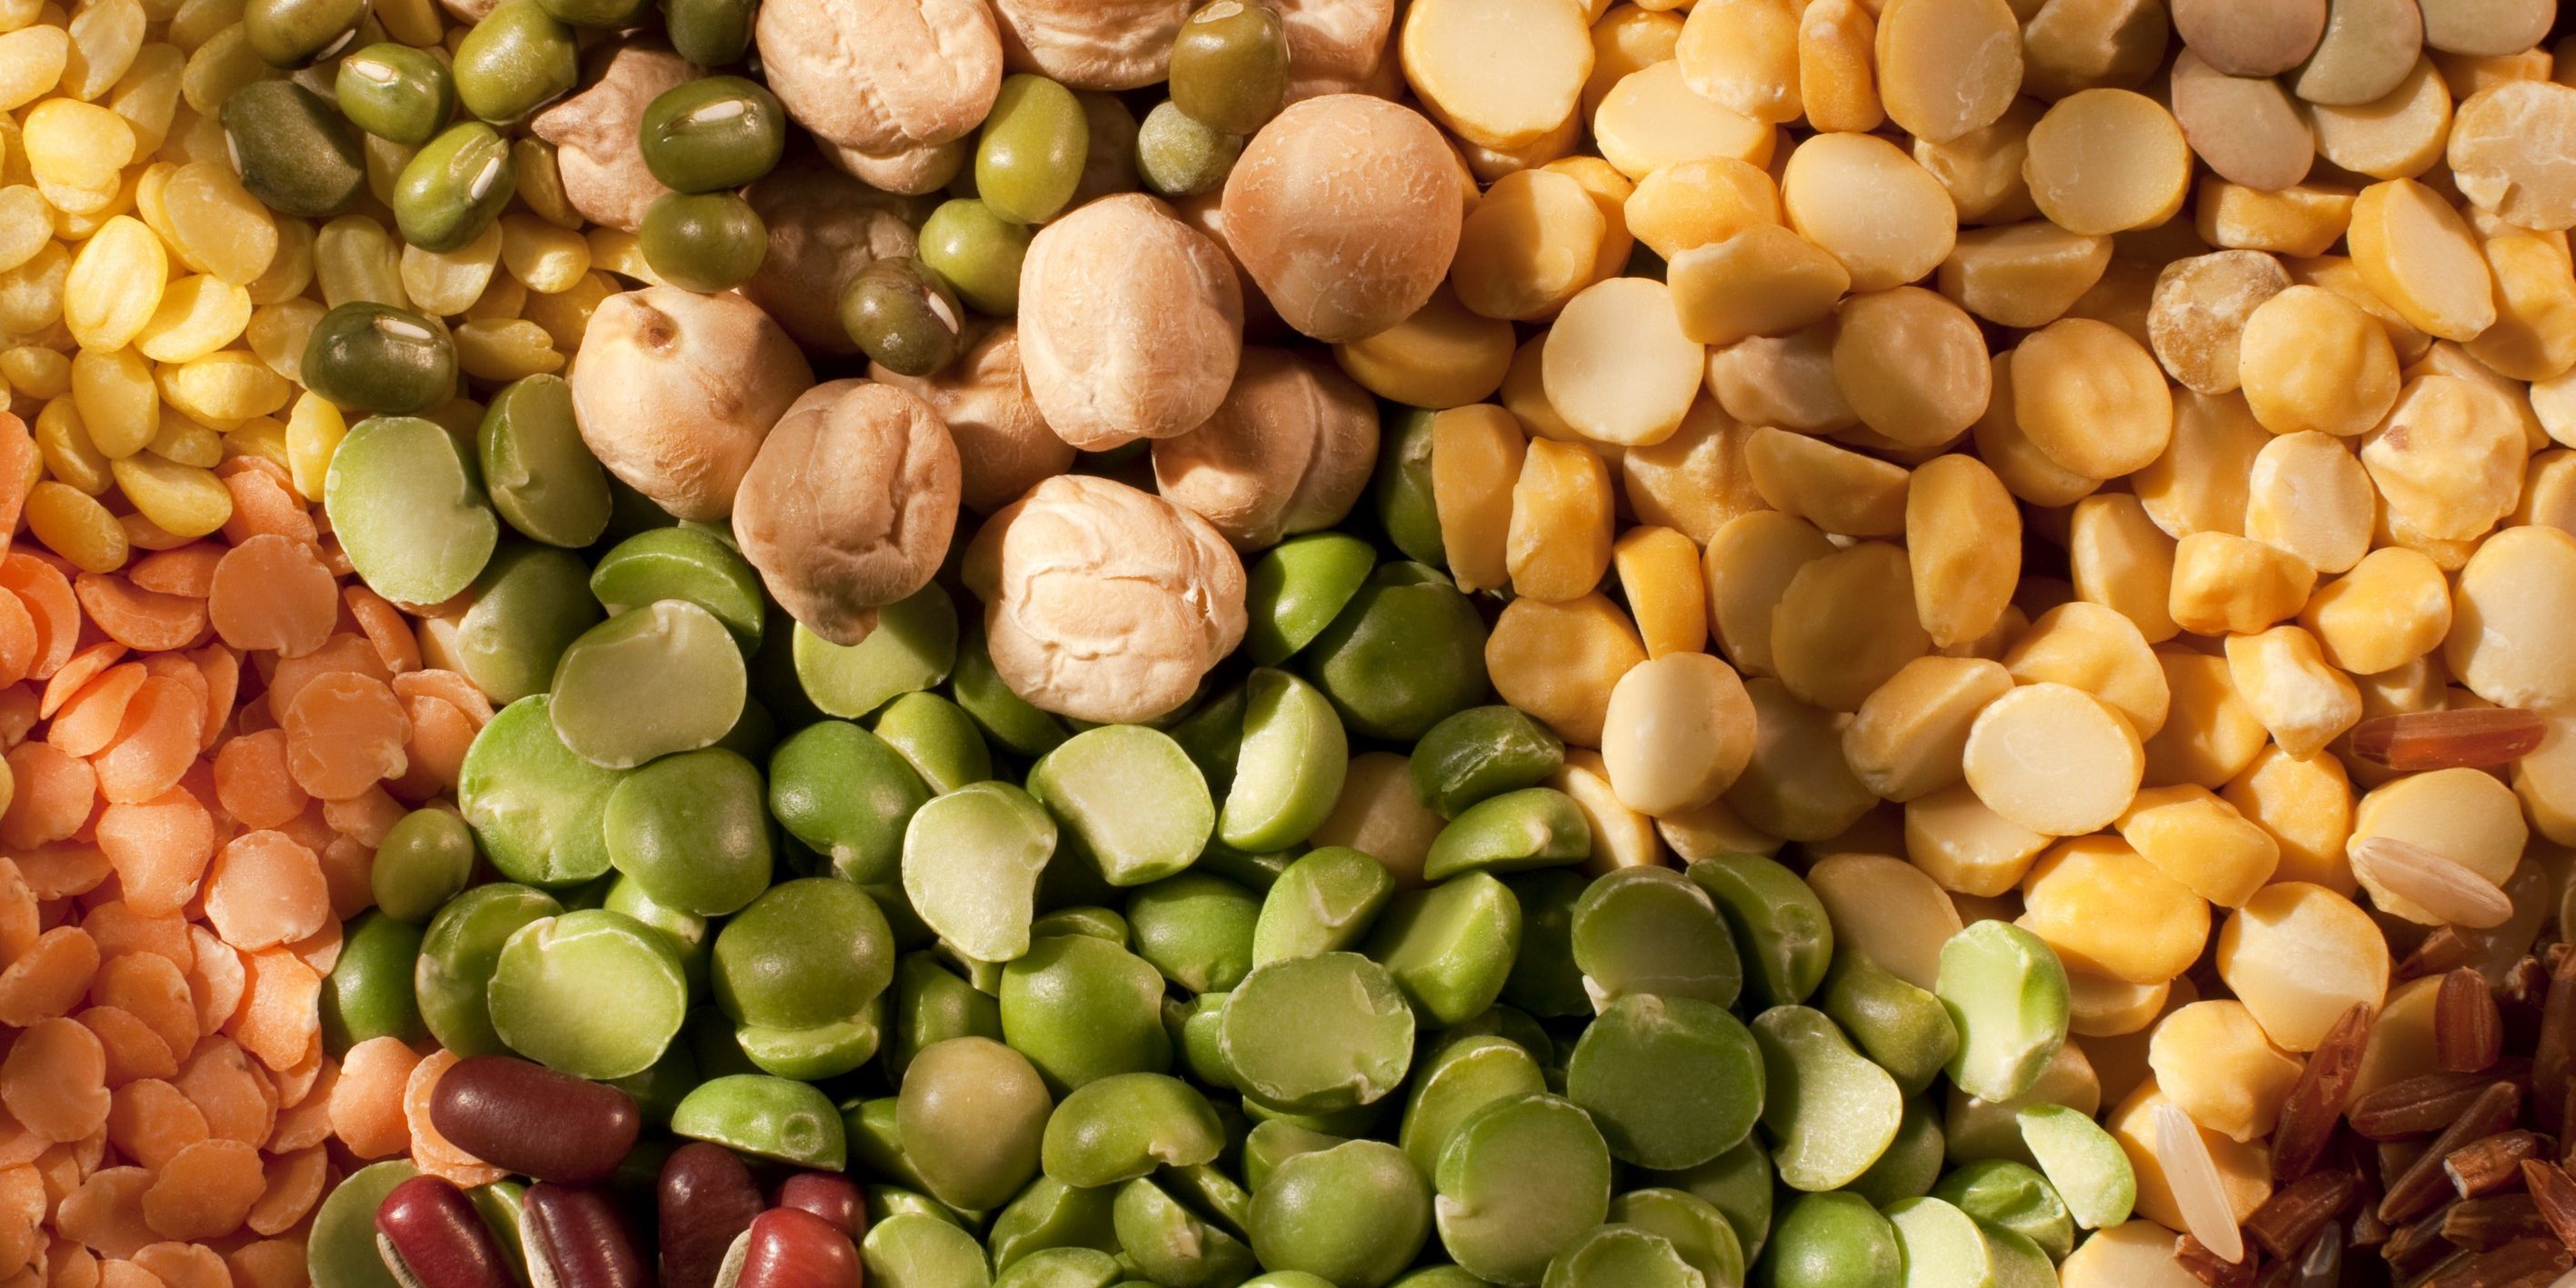 assorted-bean-pea-and-grain-background-